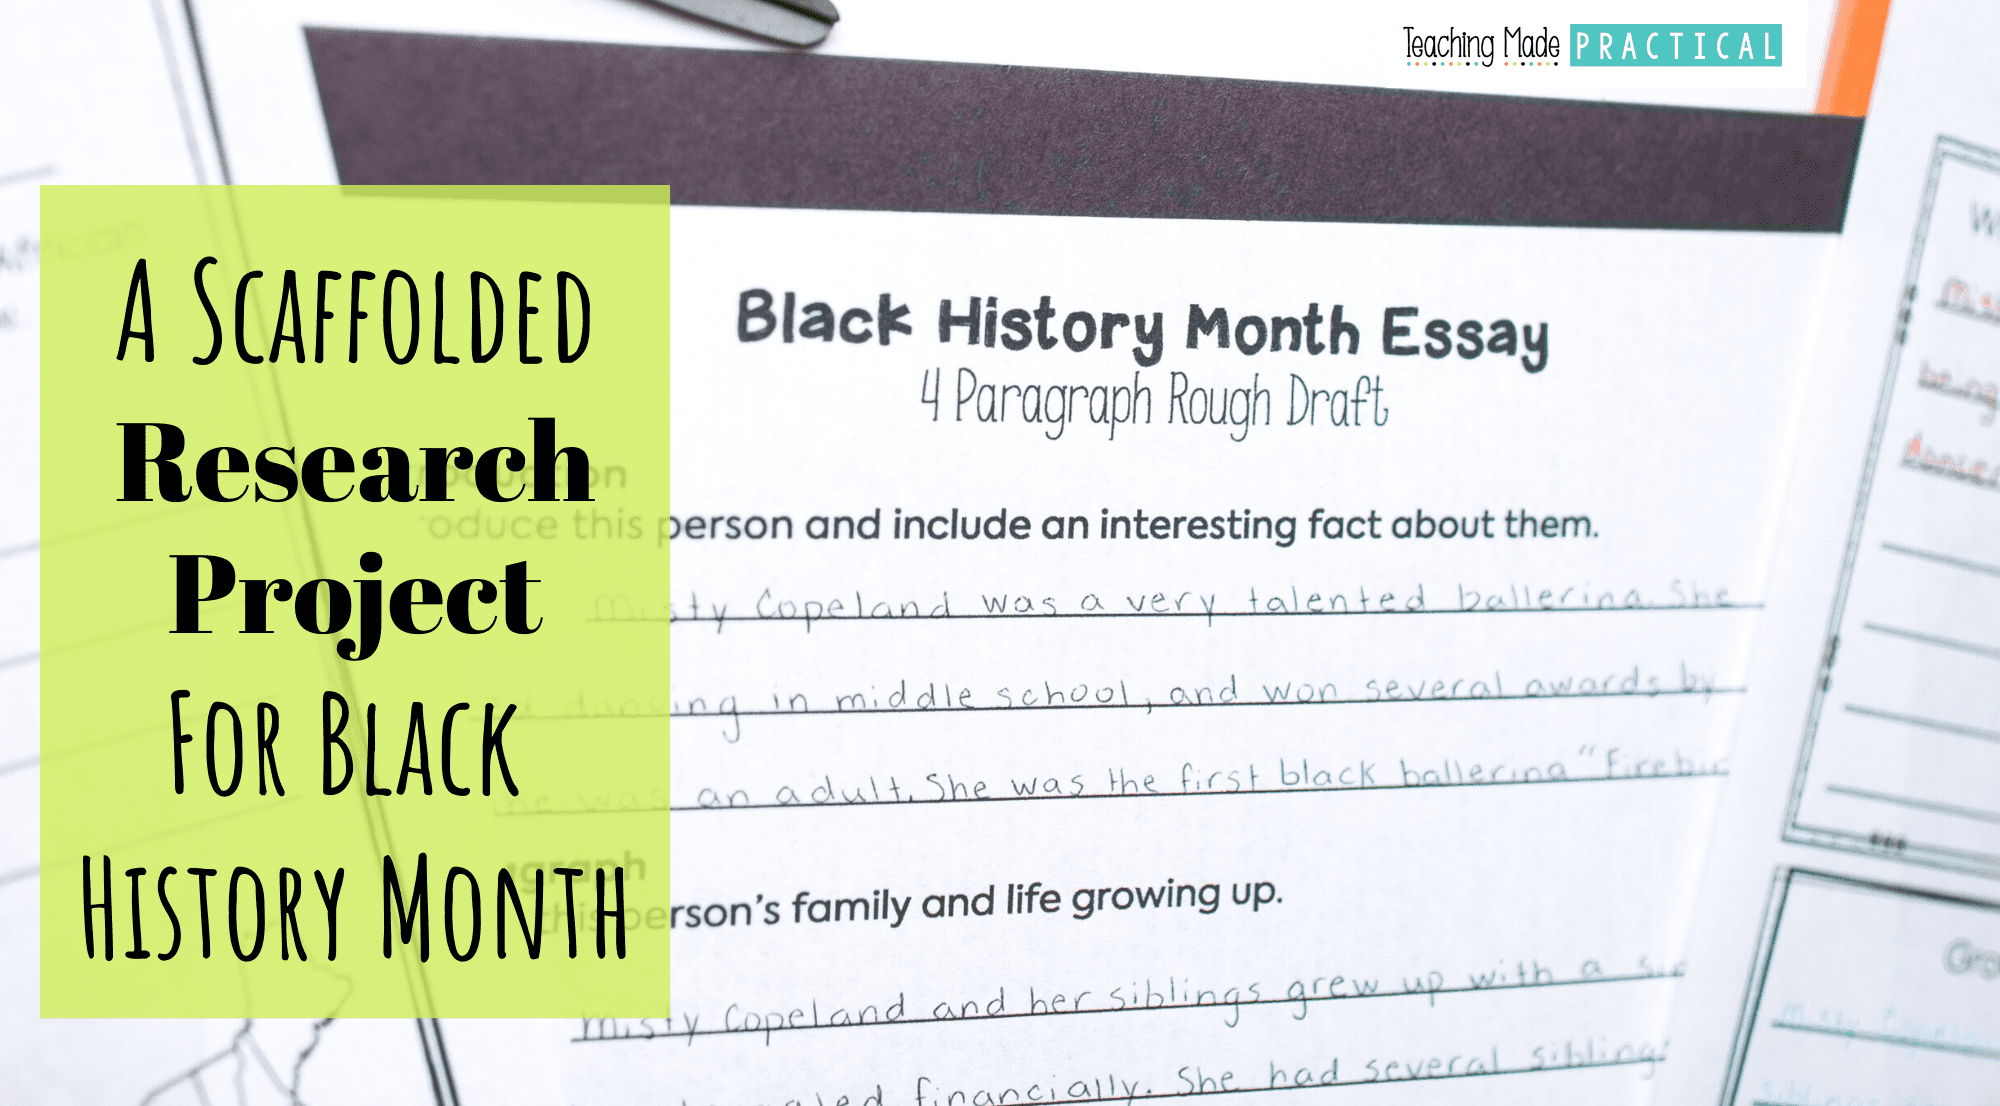 Setting up an organizing a black history month research project for 3rd, 4th, and 5th grade students.  